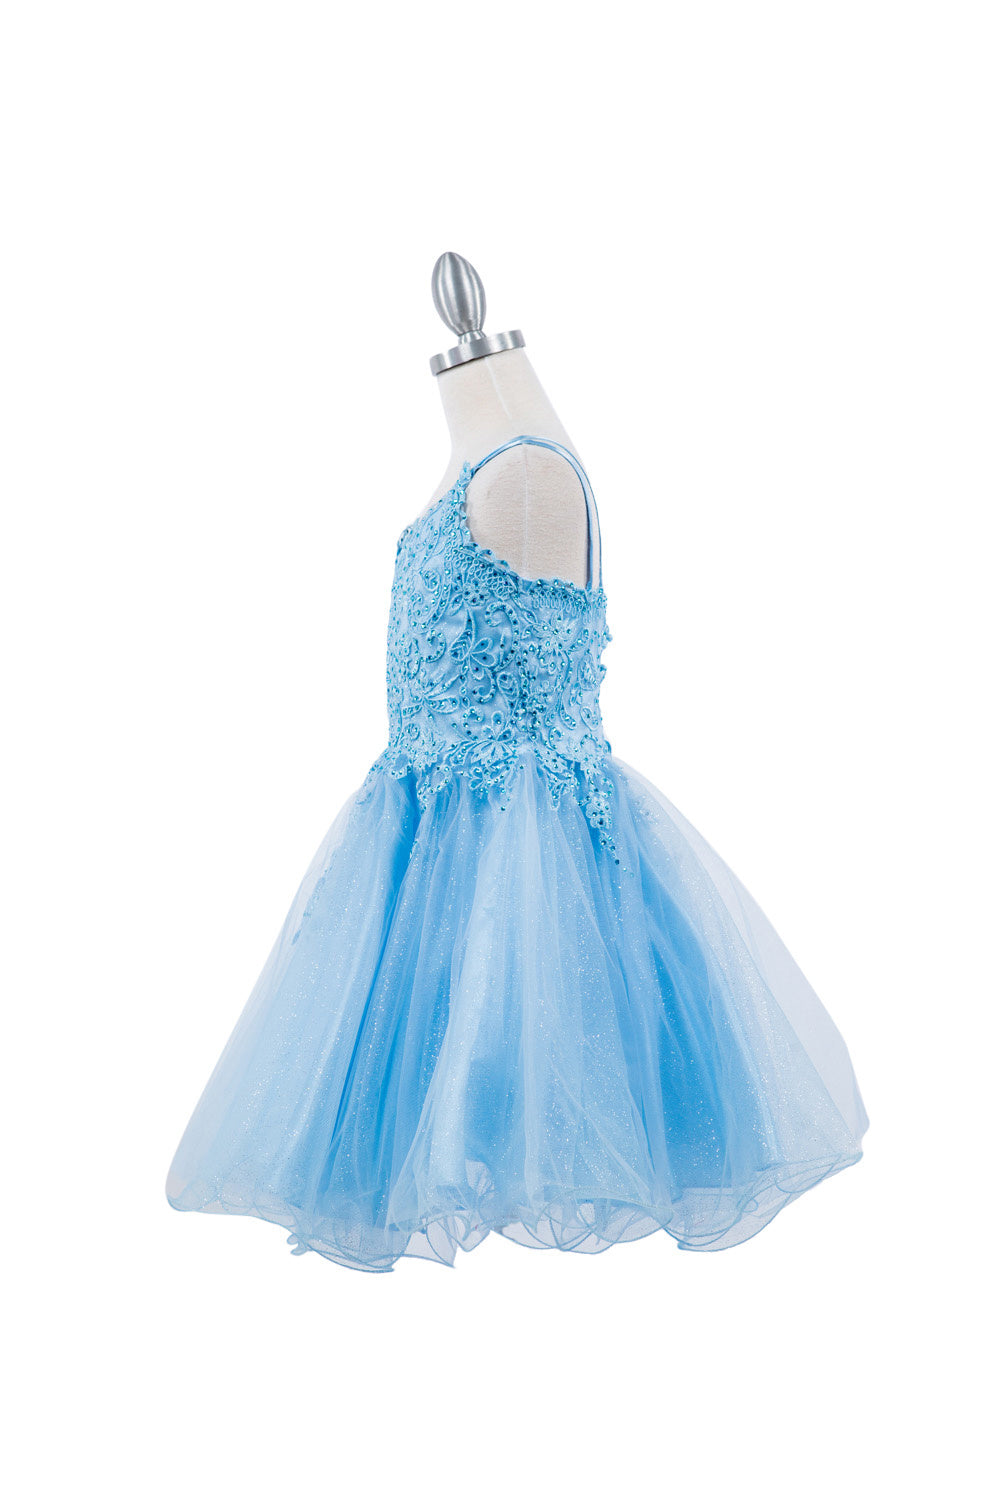 Double Spaghetti Rhinestone Embroidered Tulle Girl Dress CU5125X Elsy Style Kids Dress